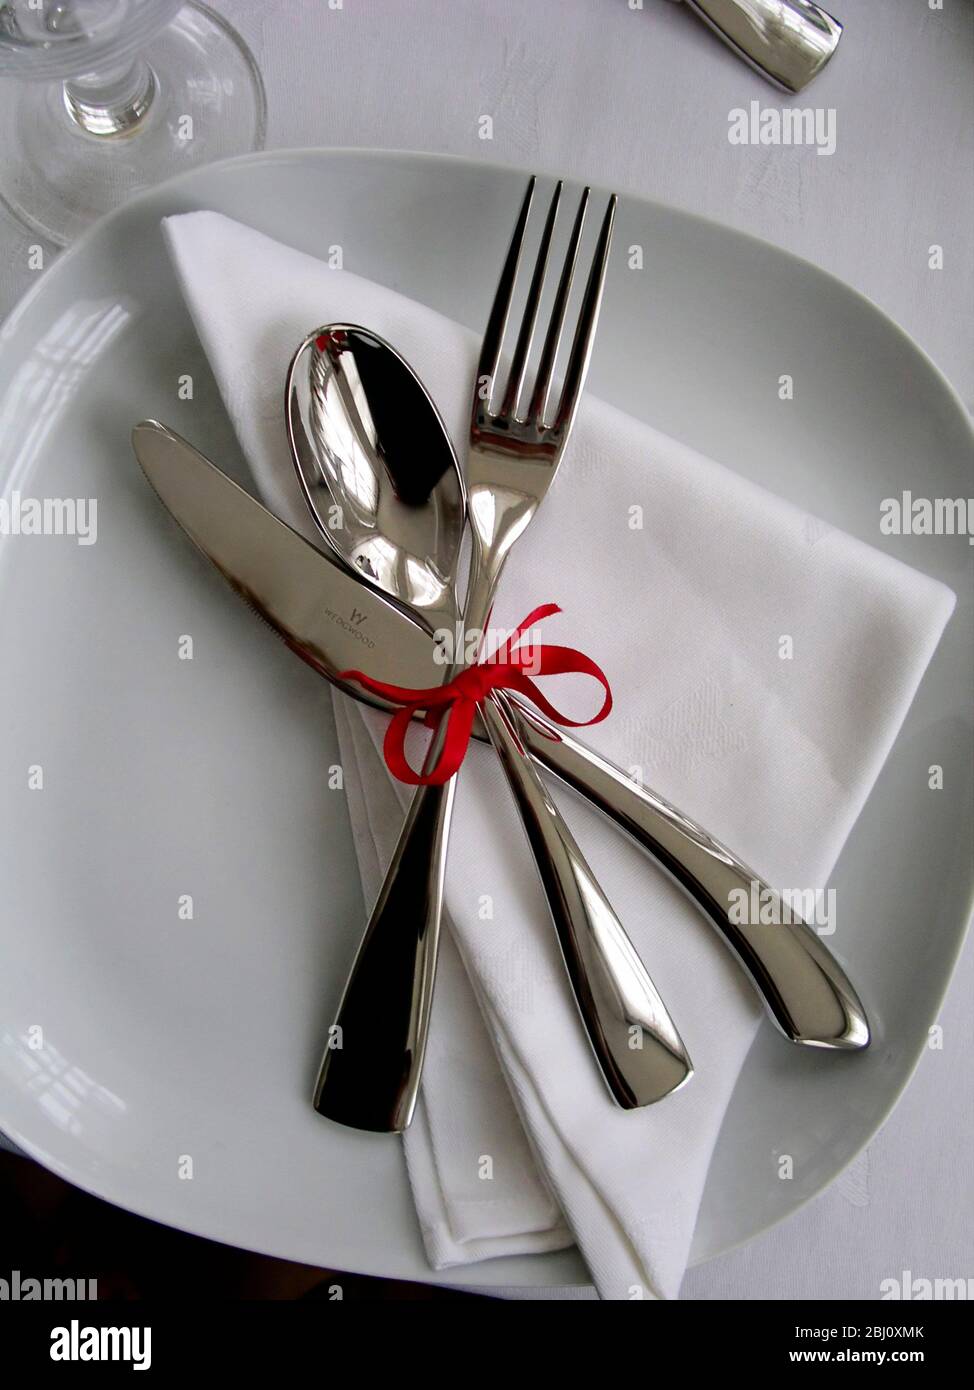 Cutlery tied with red ribbon on napkin as place setting idea - Stock Photo